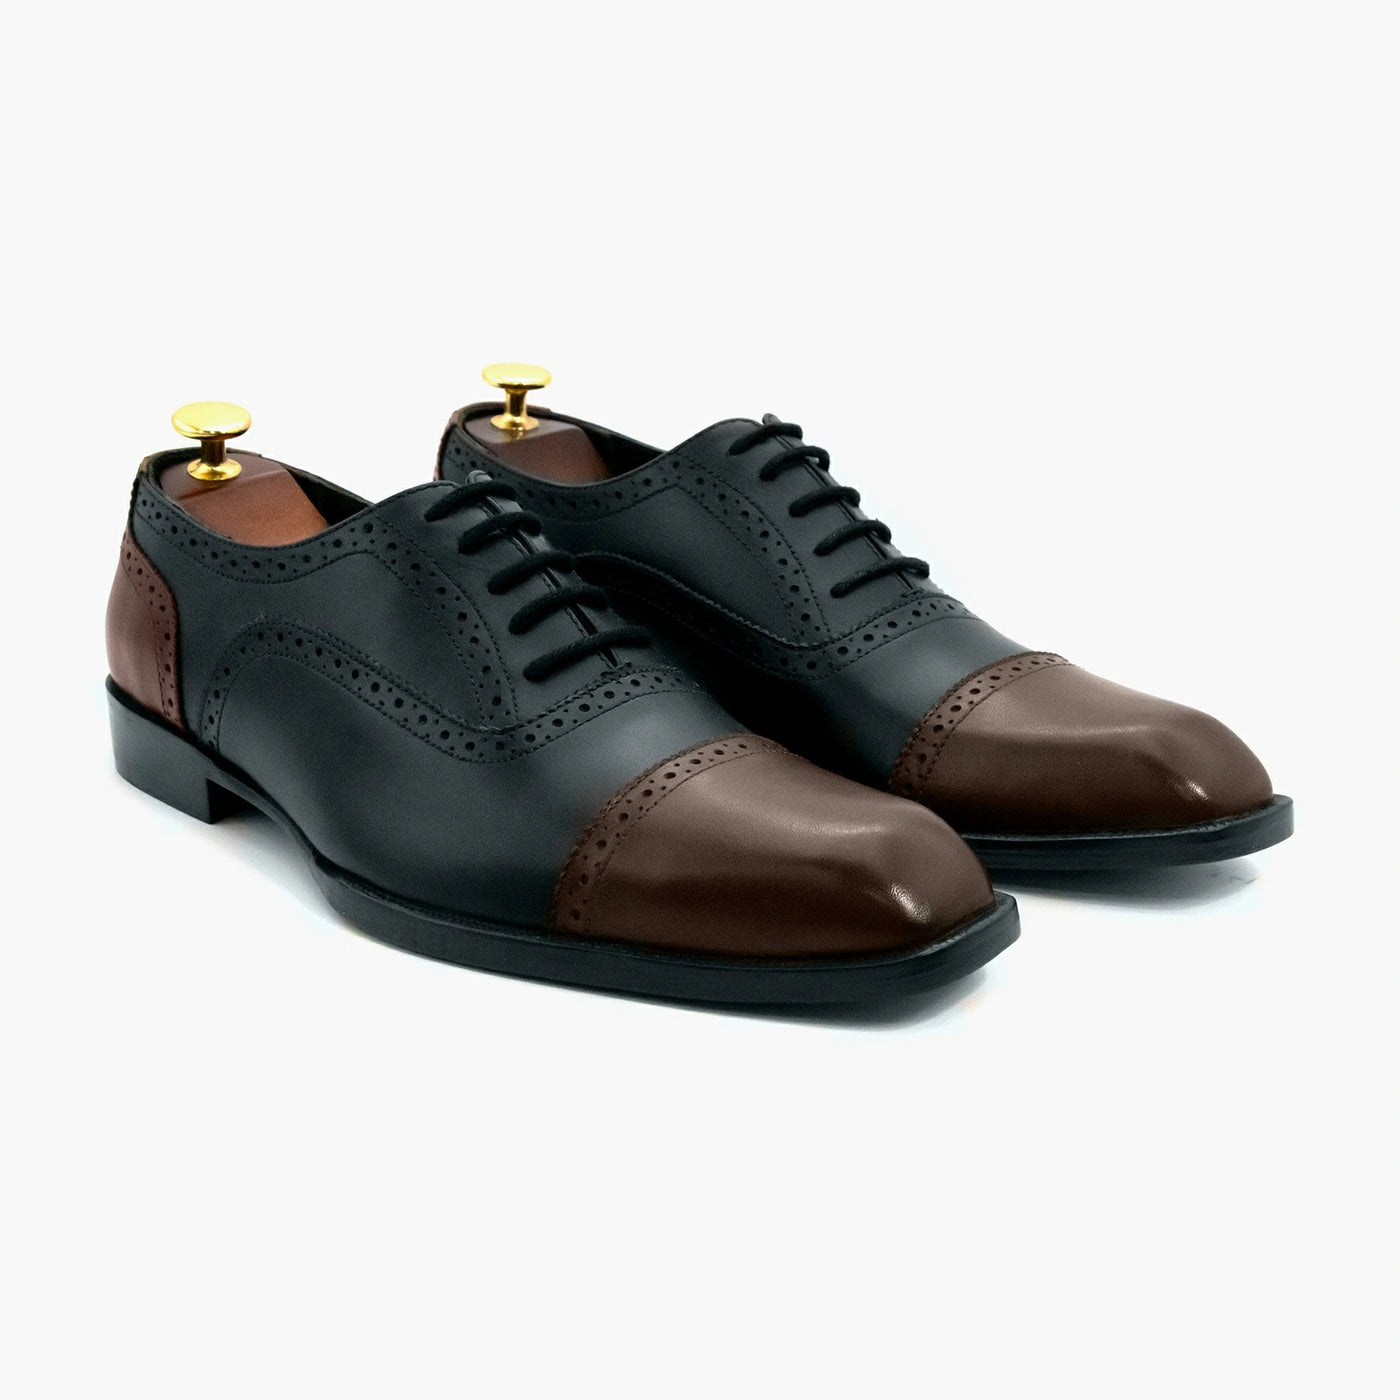 Black Brown Oxford Leather Shoes